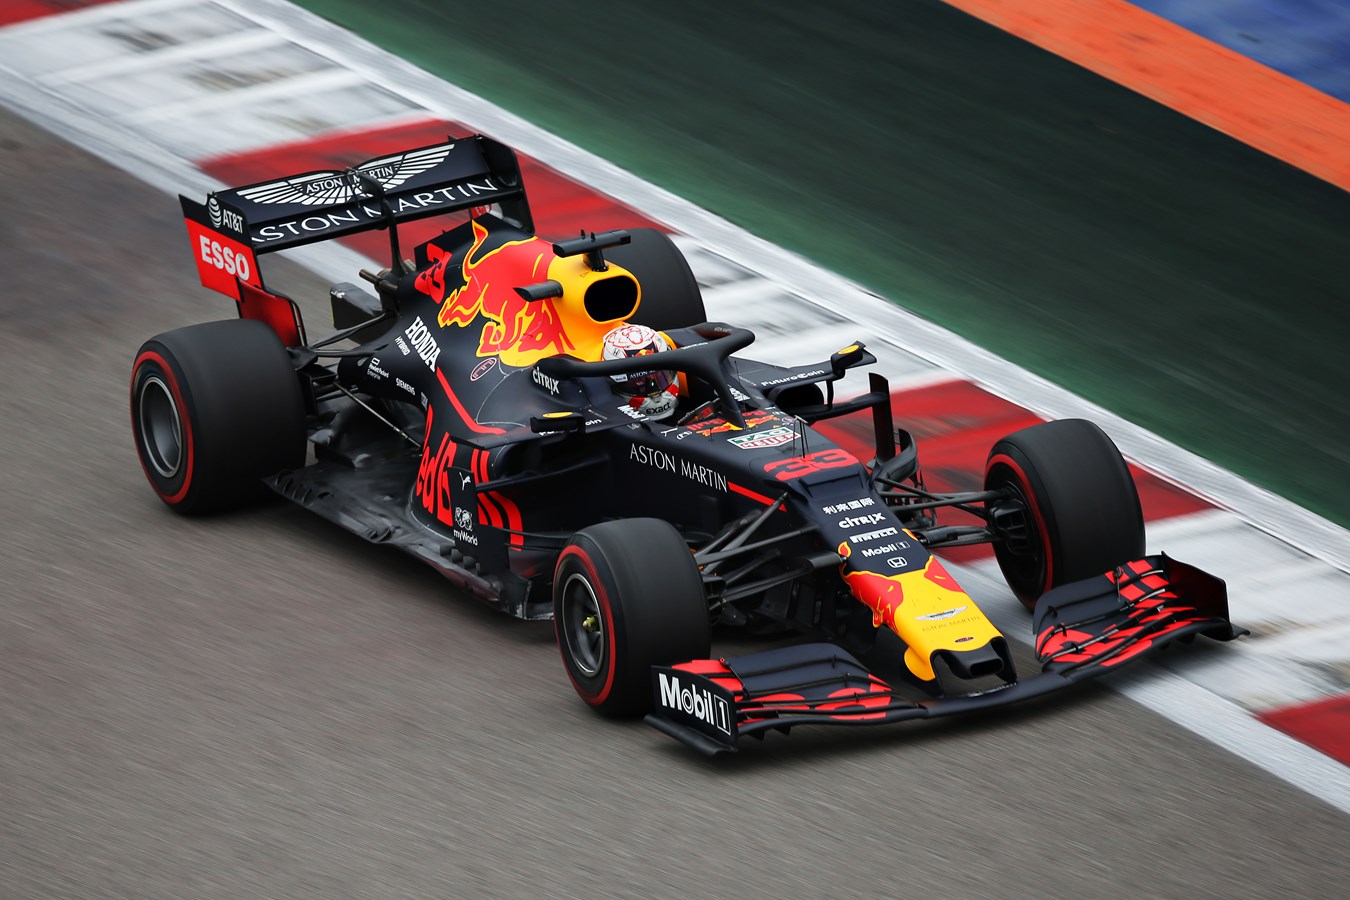 Challenging Russian Grand Prix sees double top-five finish for Red Bull ...